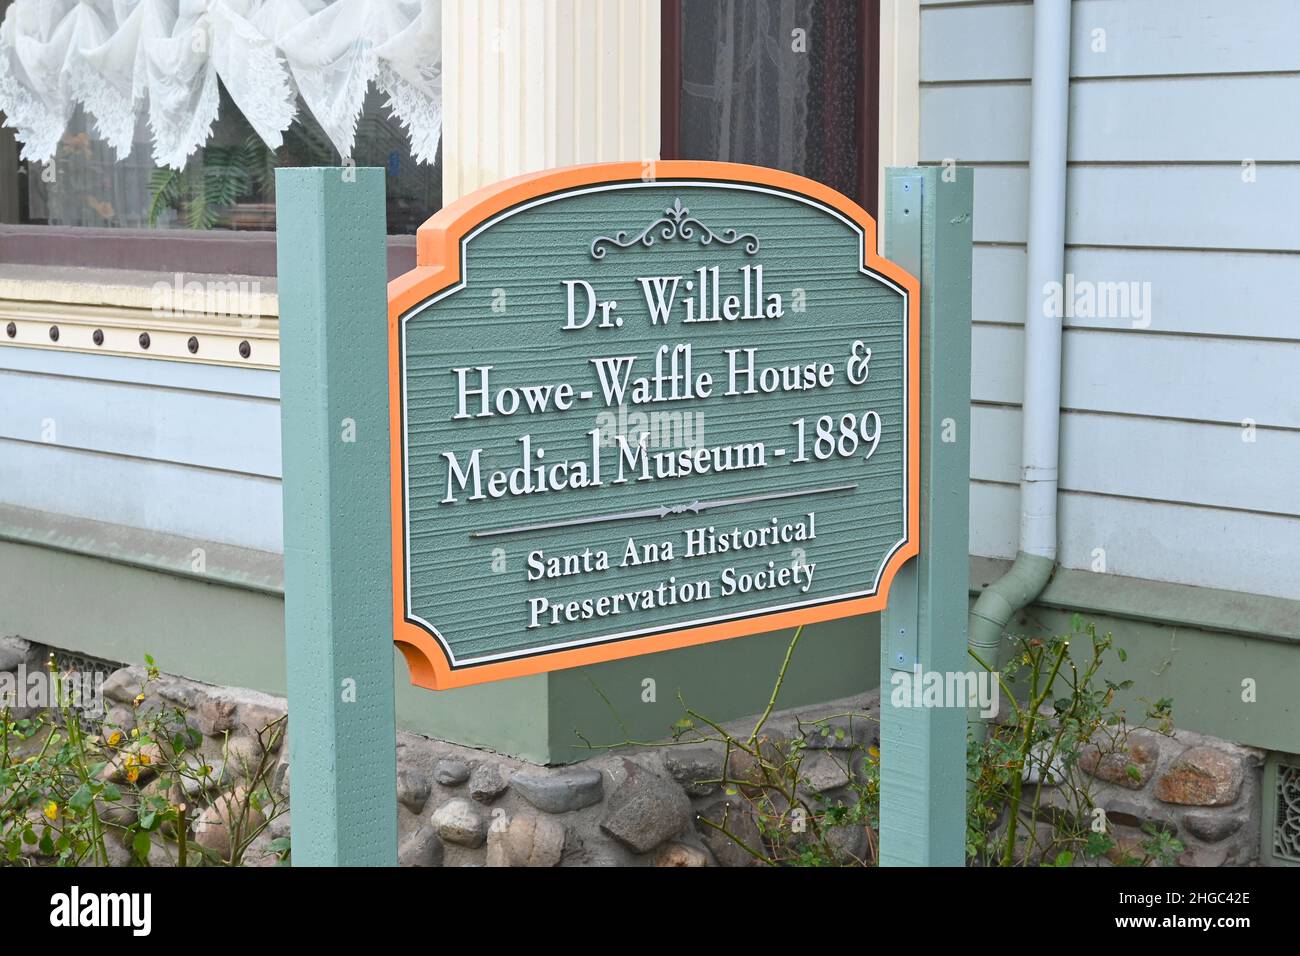 SANTA ANA, CALIFORNIA - 19 JAN 2022: Sign at the Dr. Willella Howe-Waffle House and Medical Museum. Stock Photo